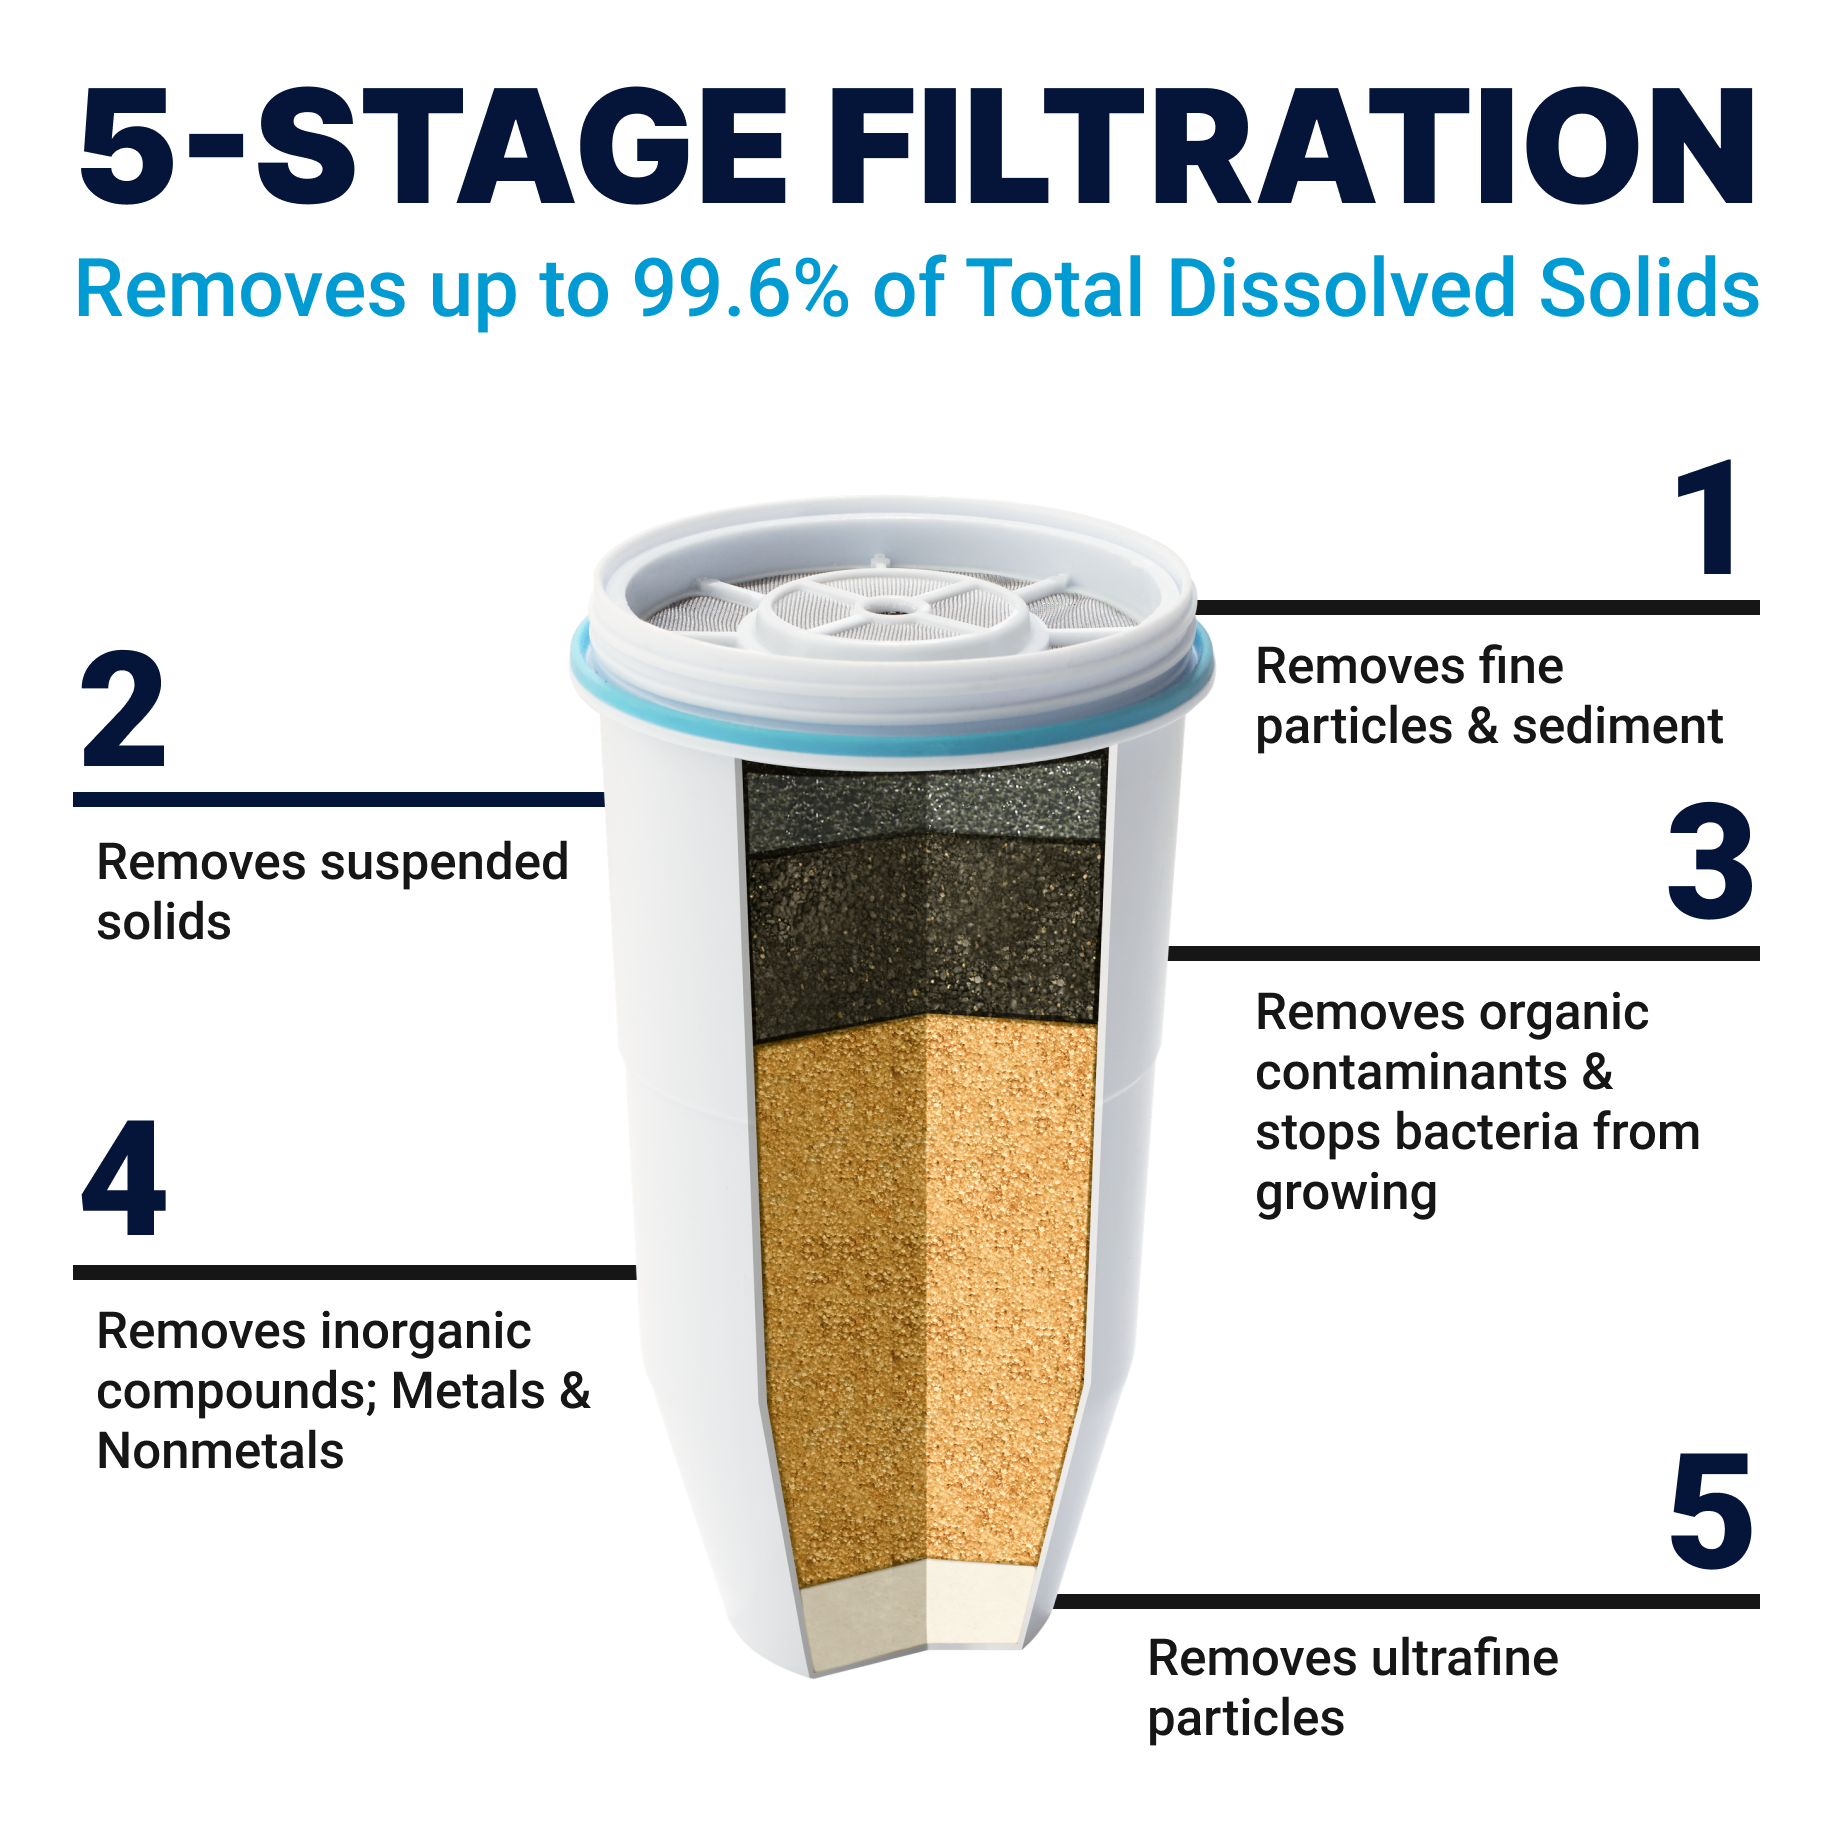 5 stage filtration. removed up to 99.9% Total dissolved solids